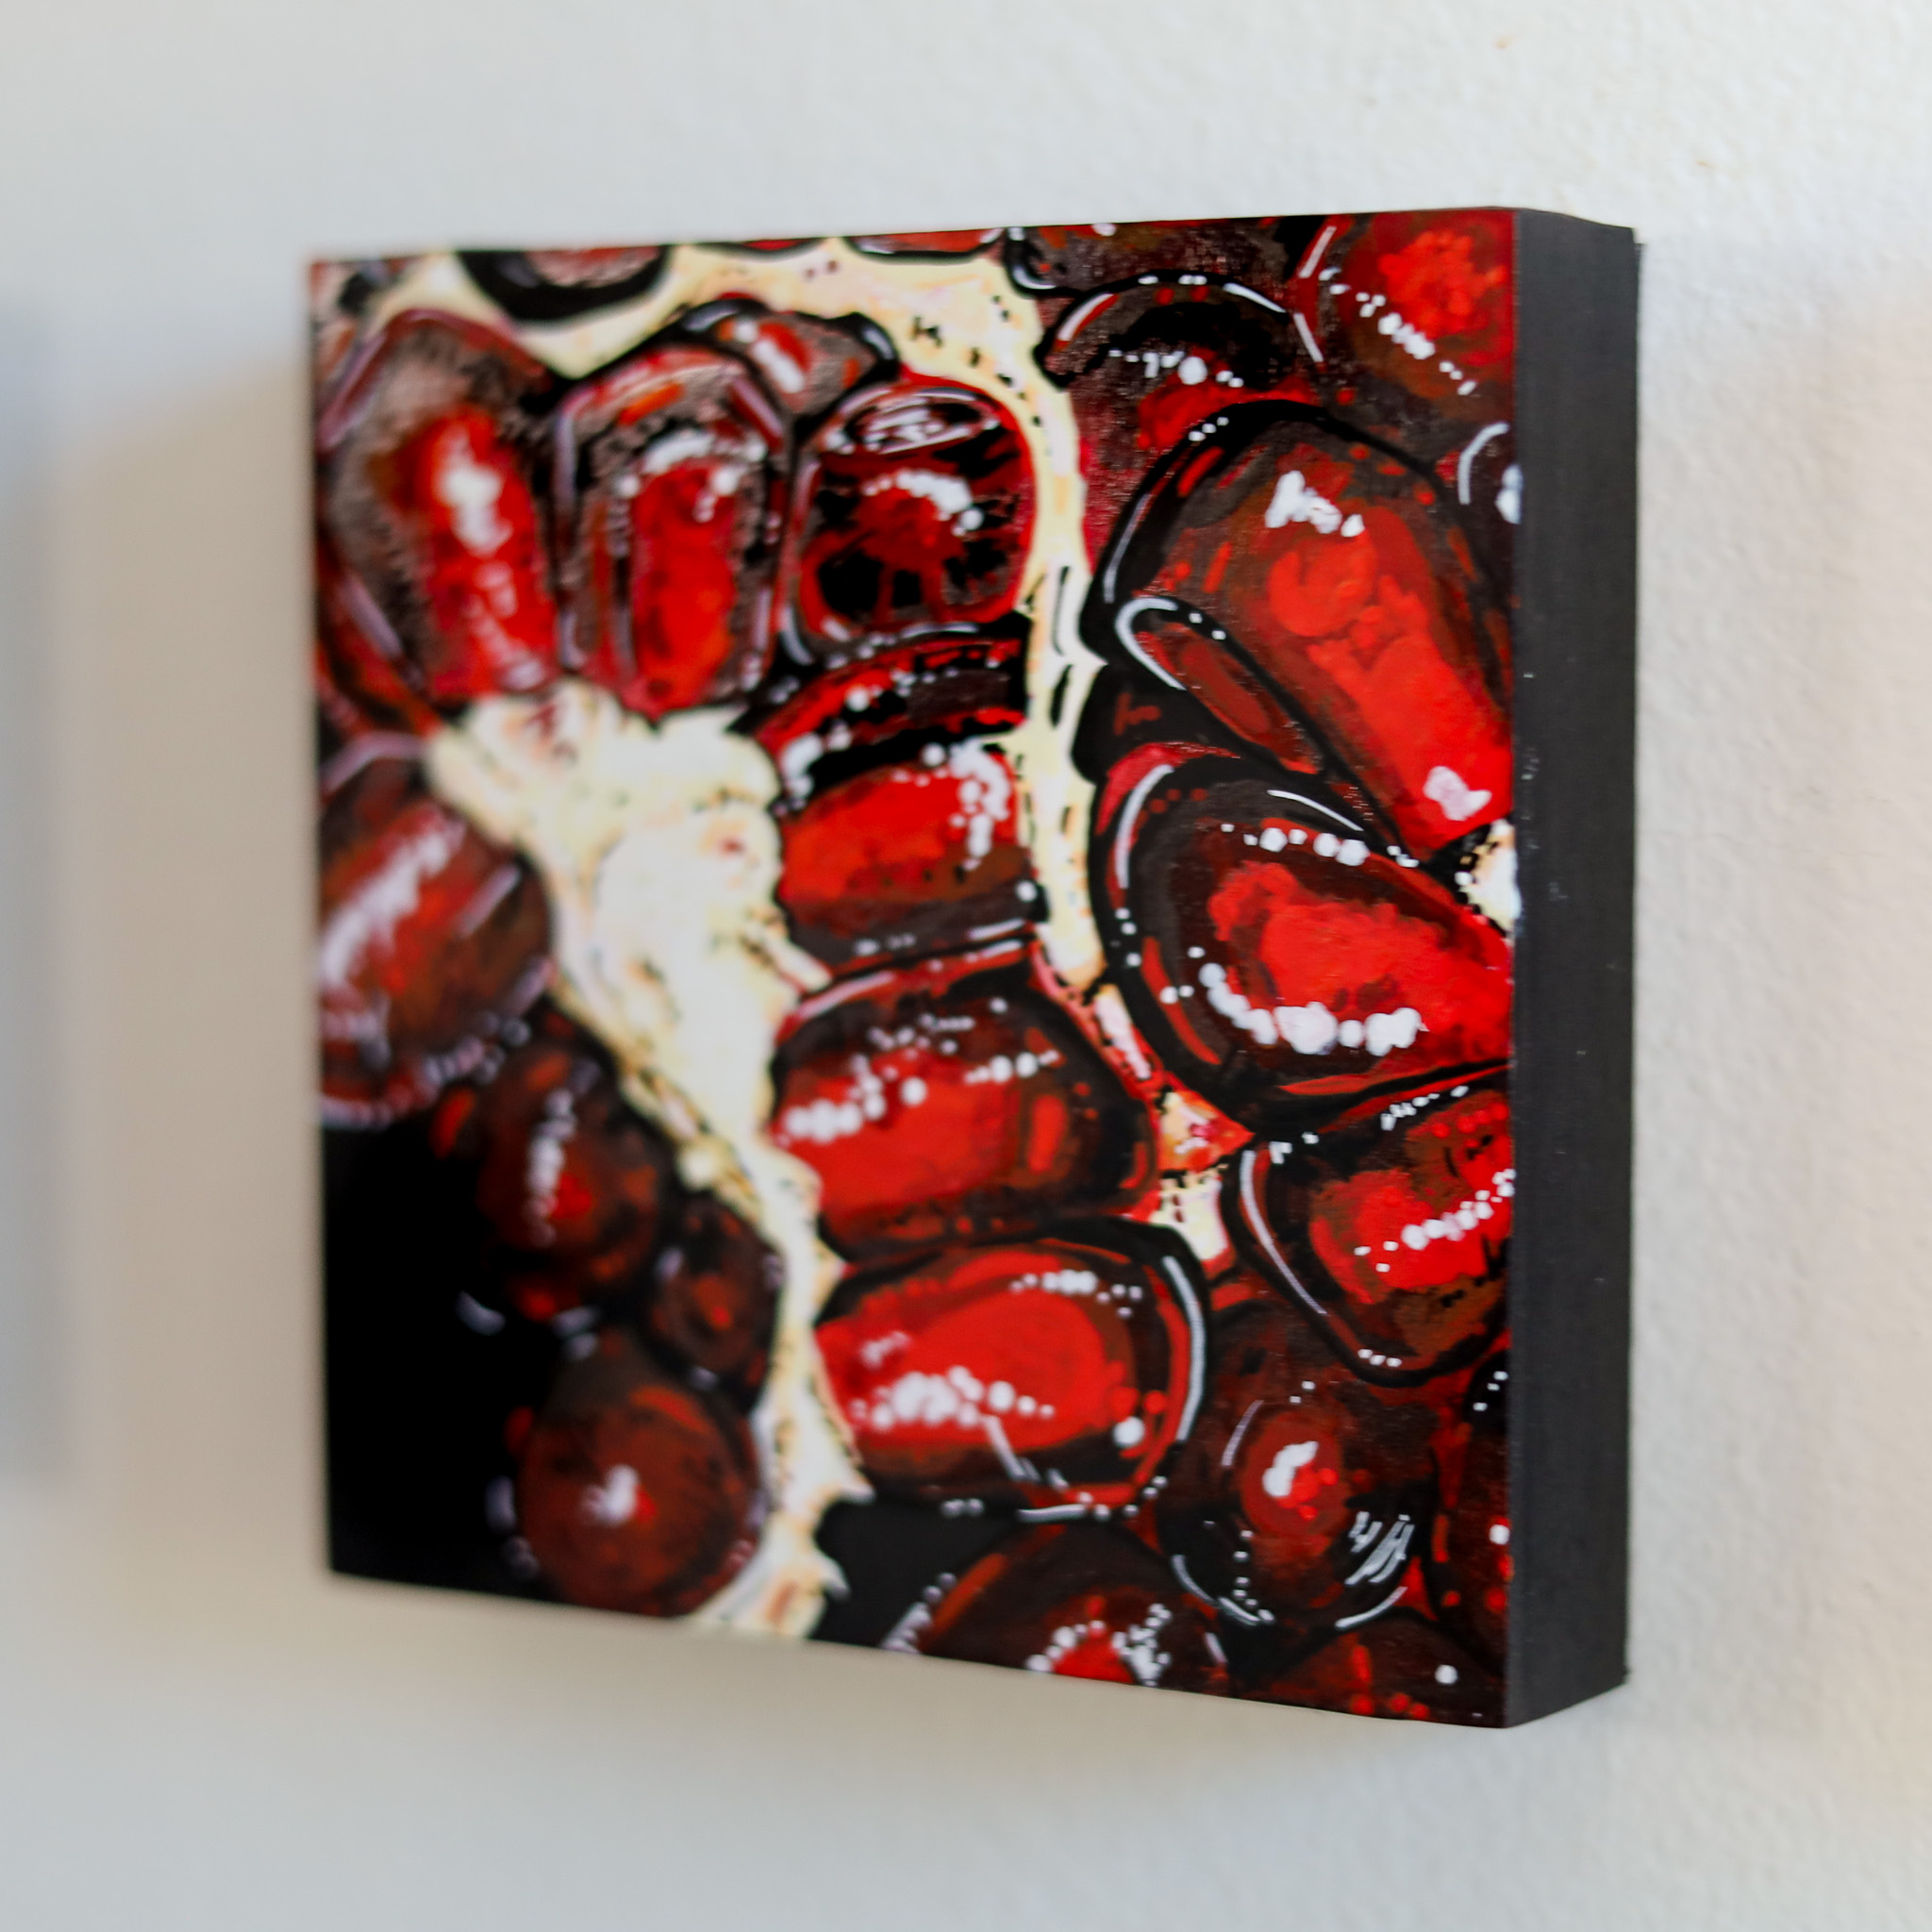 Angela Faustina, POMEGRANATE LVII, 2023. Acrylic on cradled painting panel, 4" by 4". Available through Angela's studio shop.